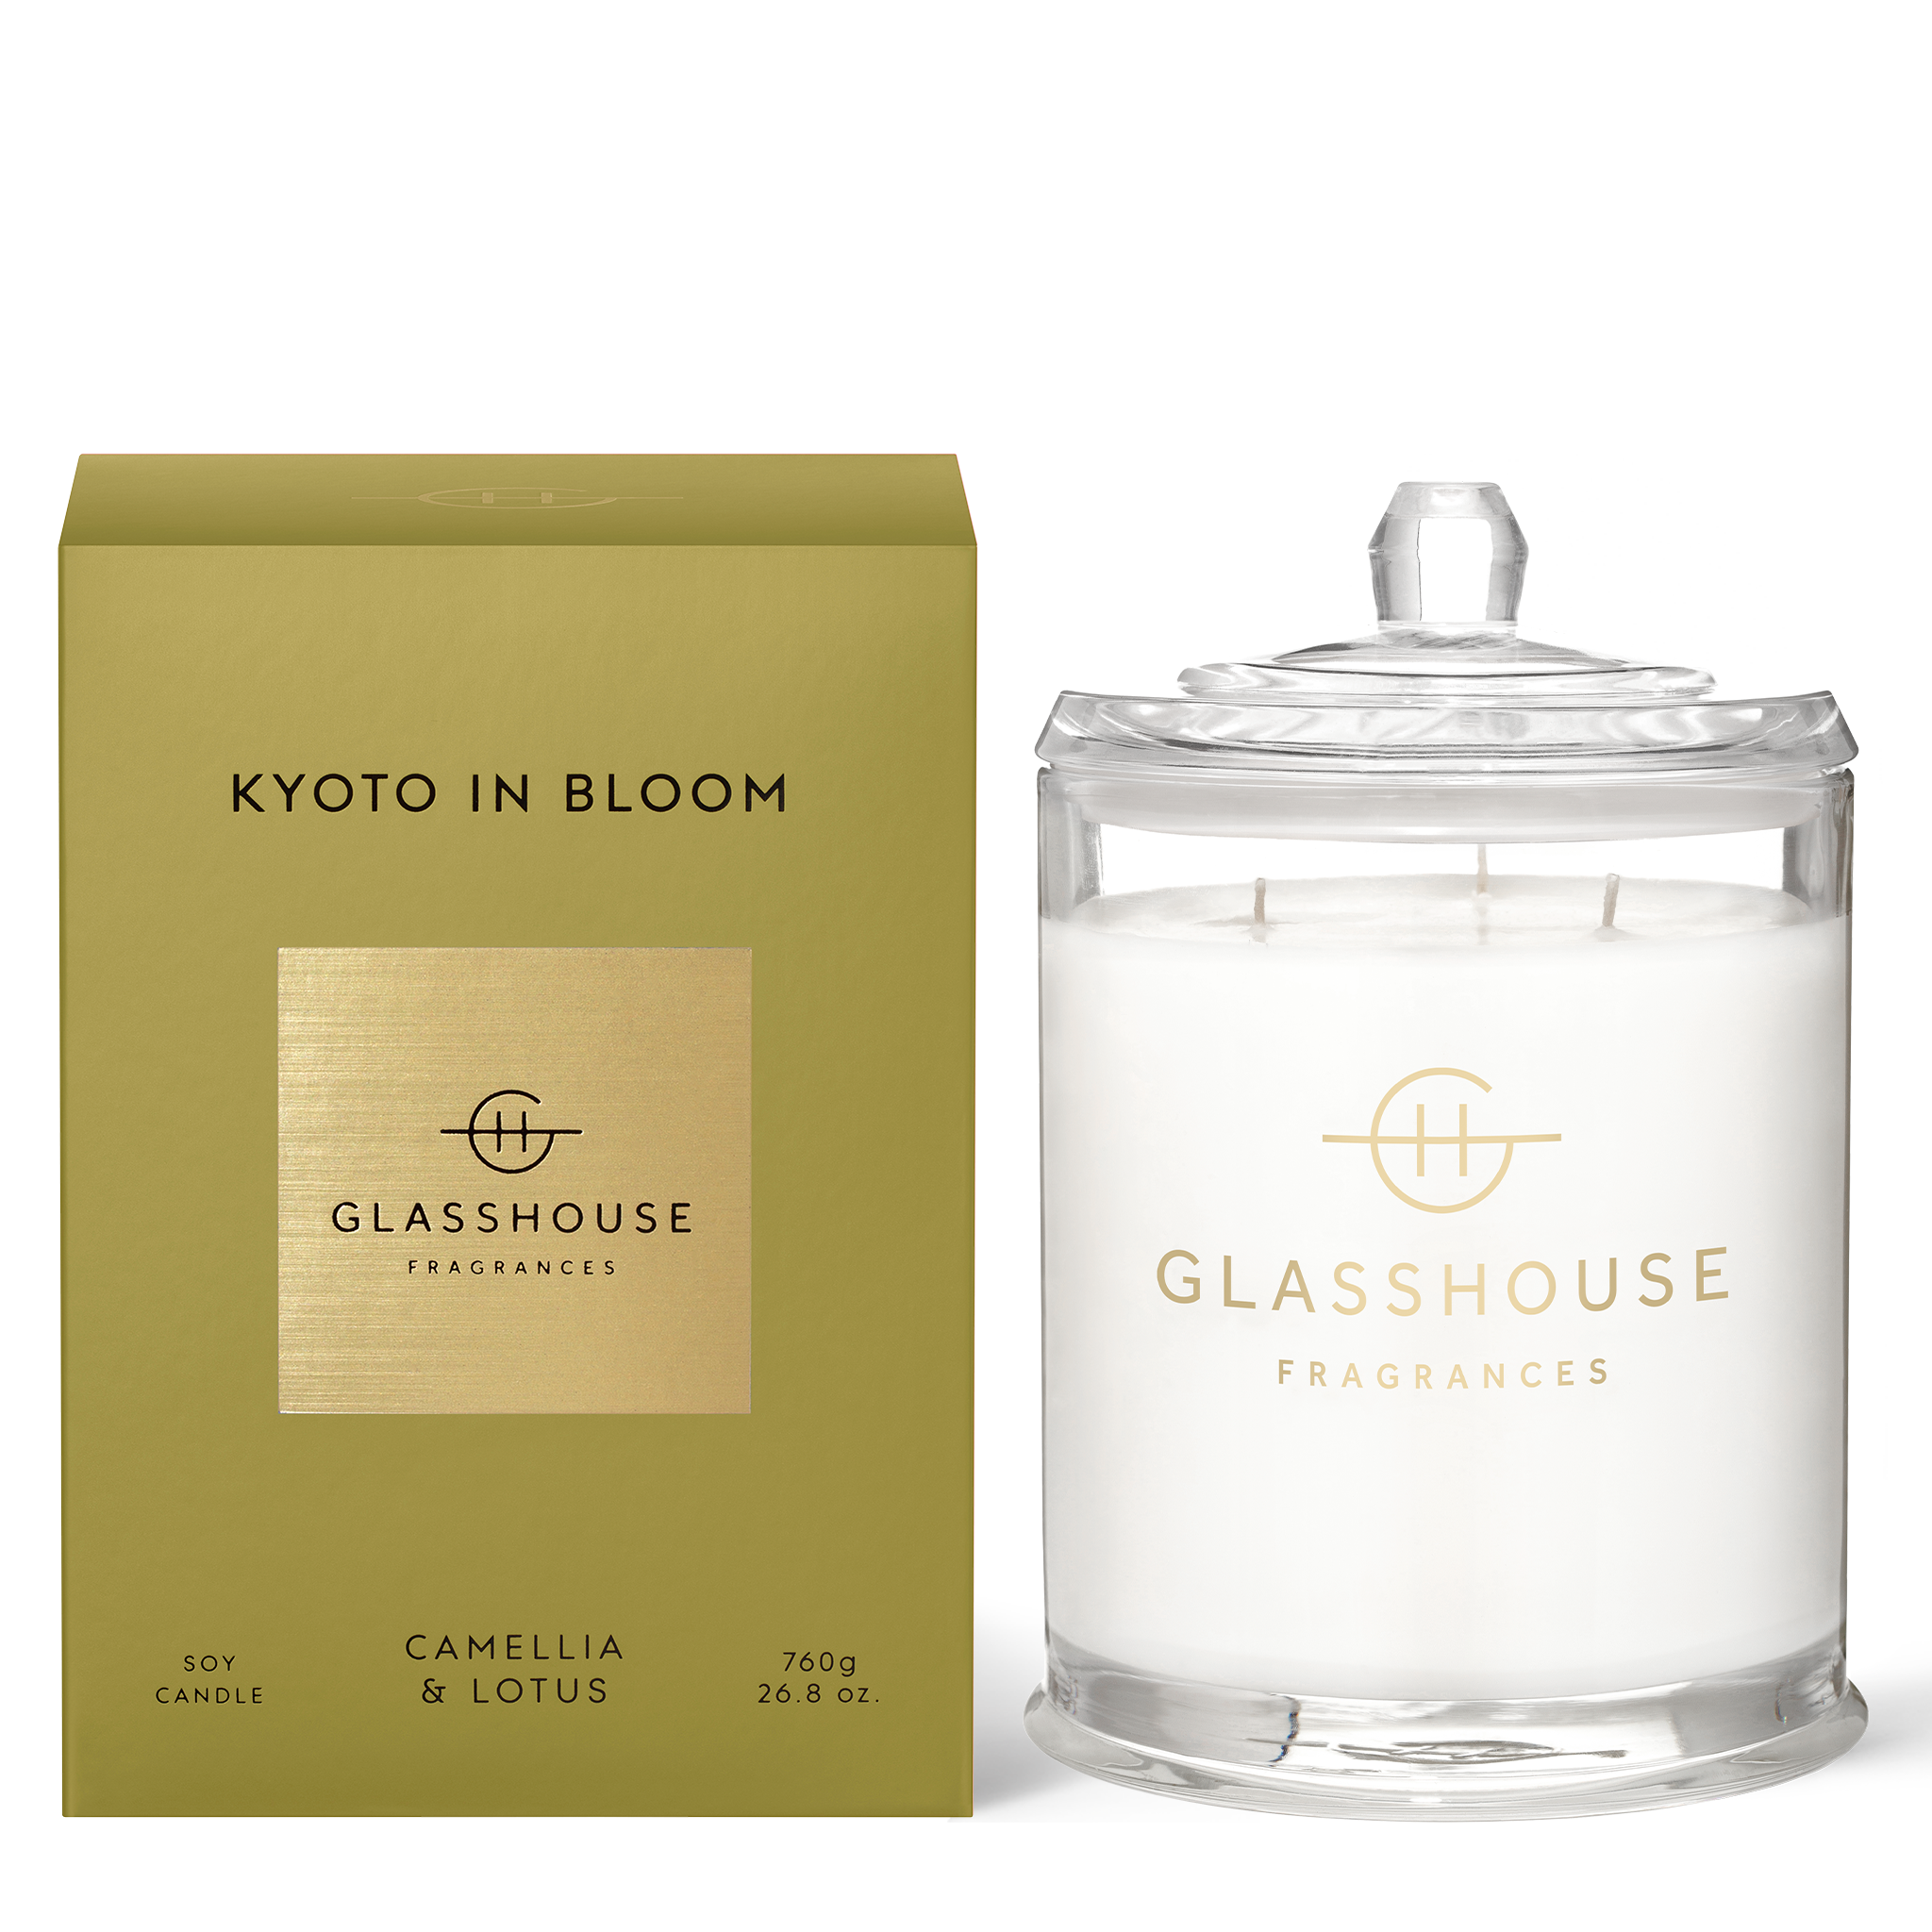 Kyoto in Bloom Candle